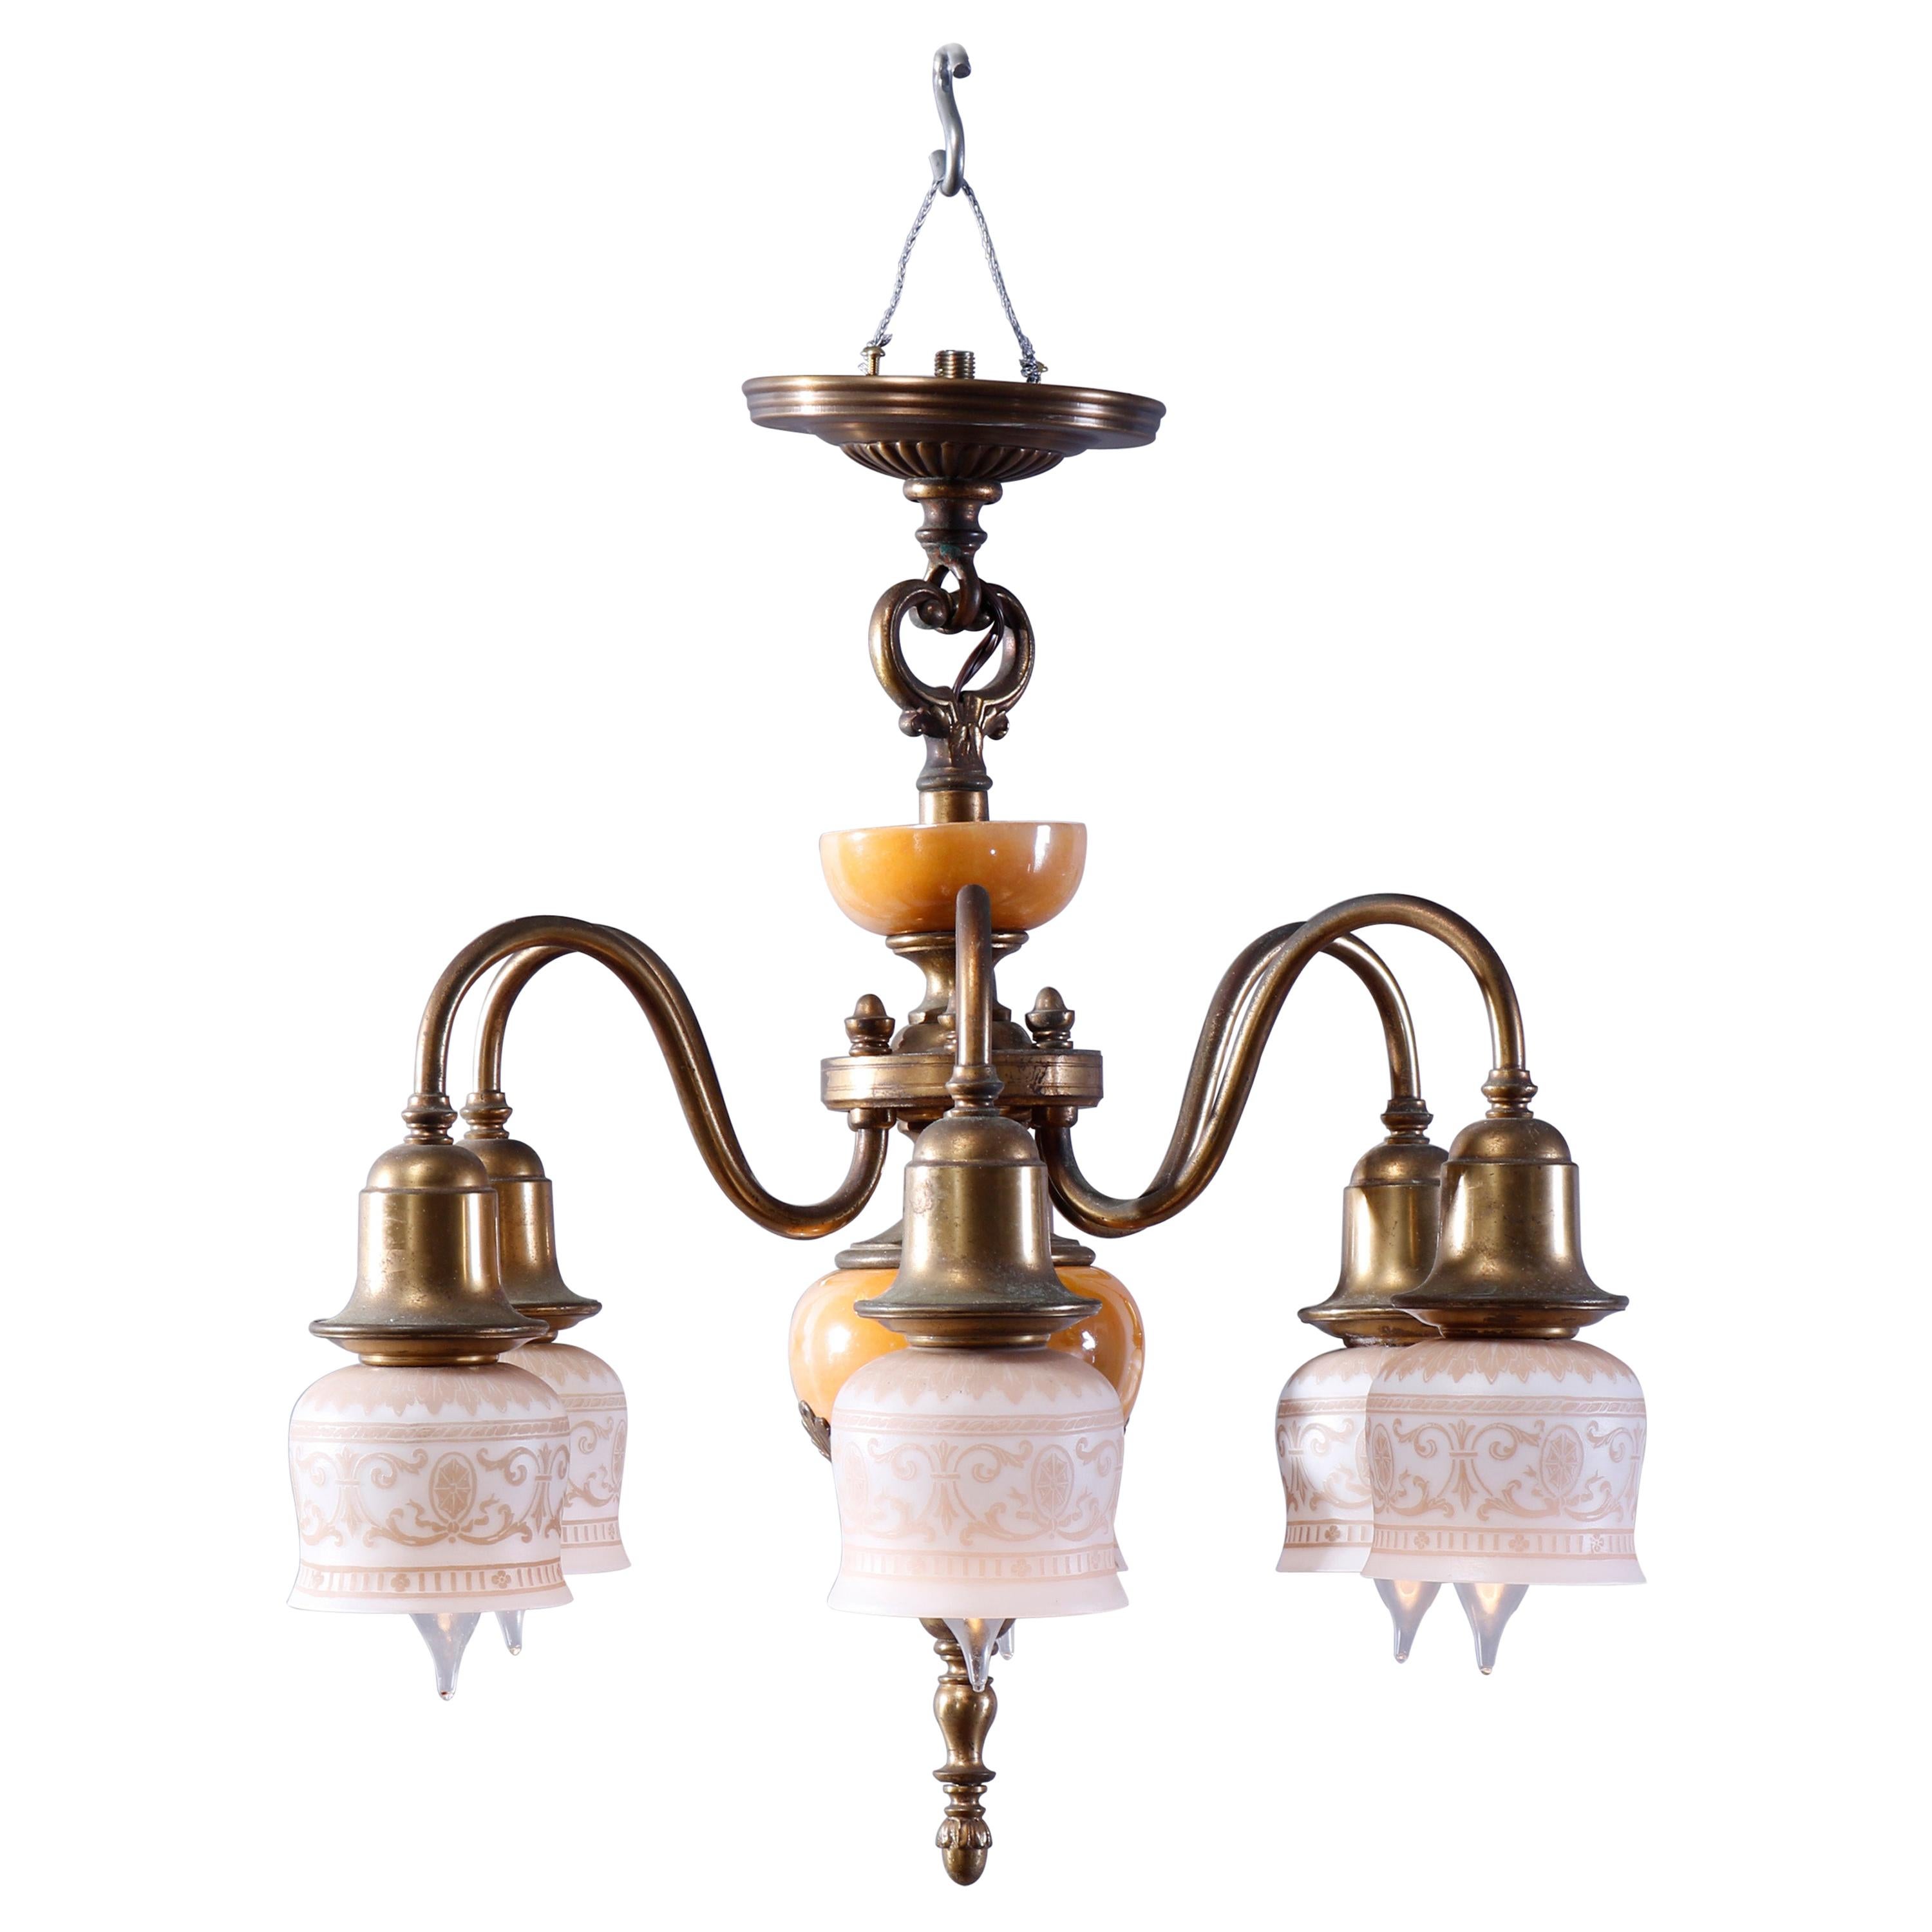 Antique Arts & Crafts Chandelier with Etched Shades, Brass & Glass, c1930